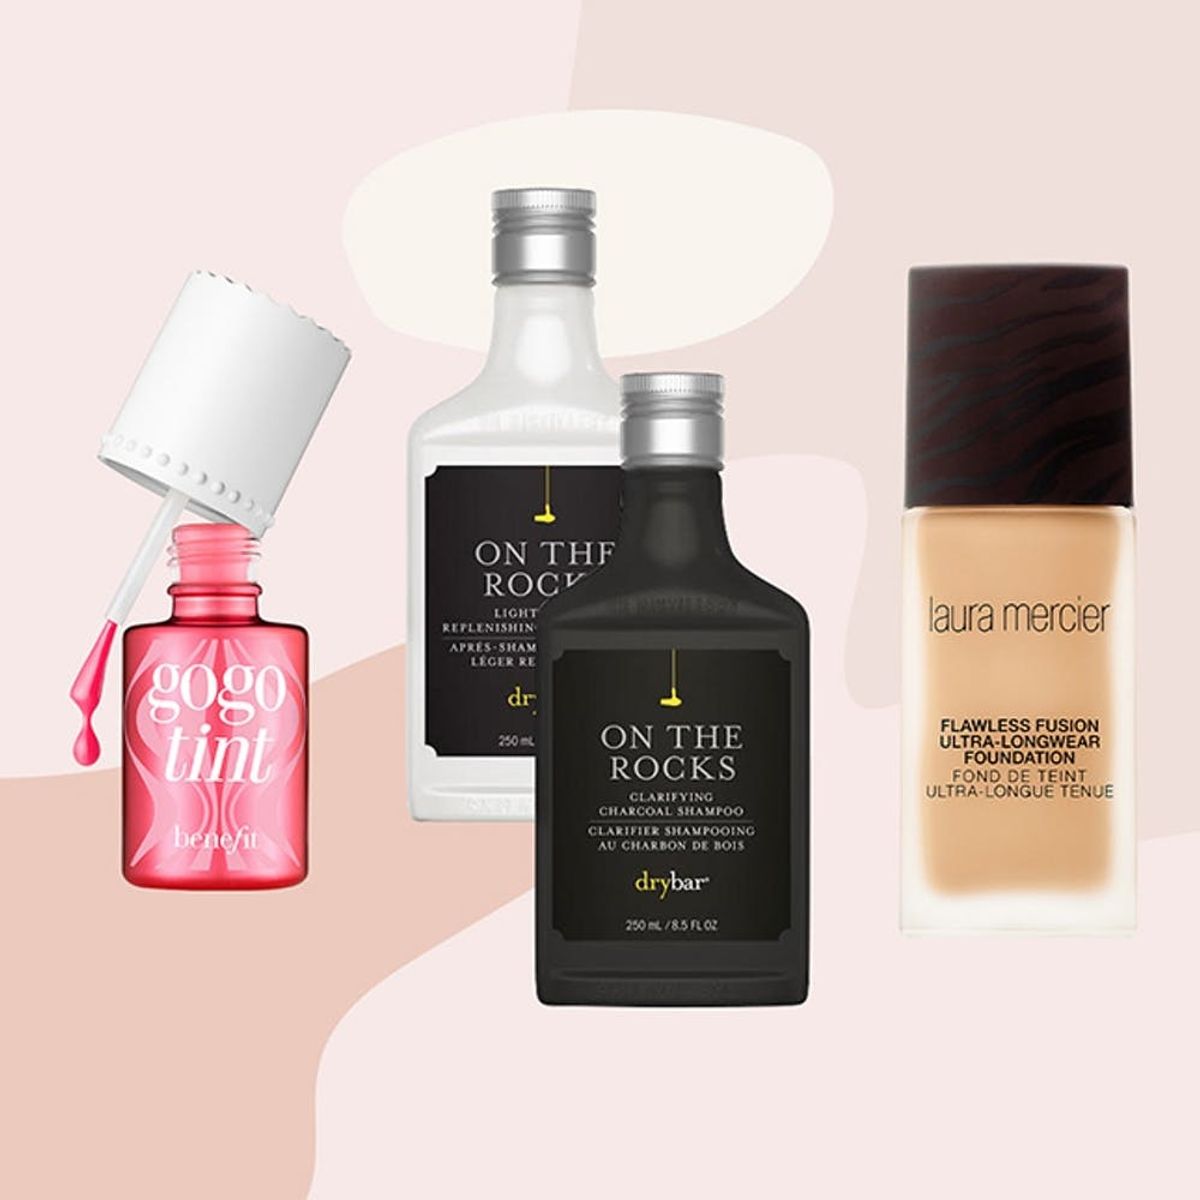 10 New Beauty Products to Add to Your Routine in August